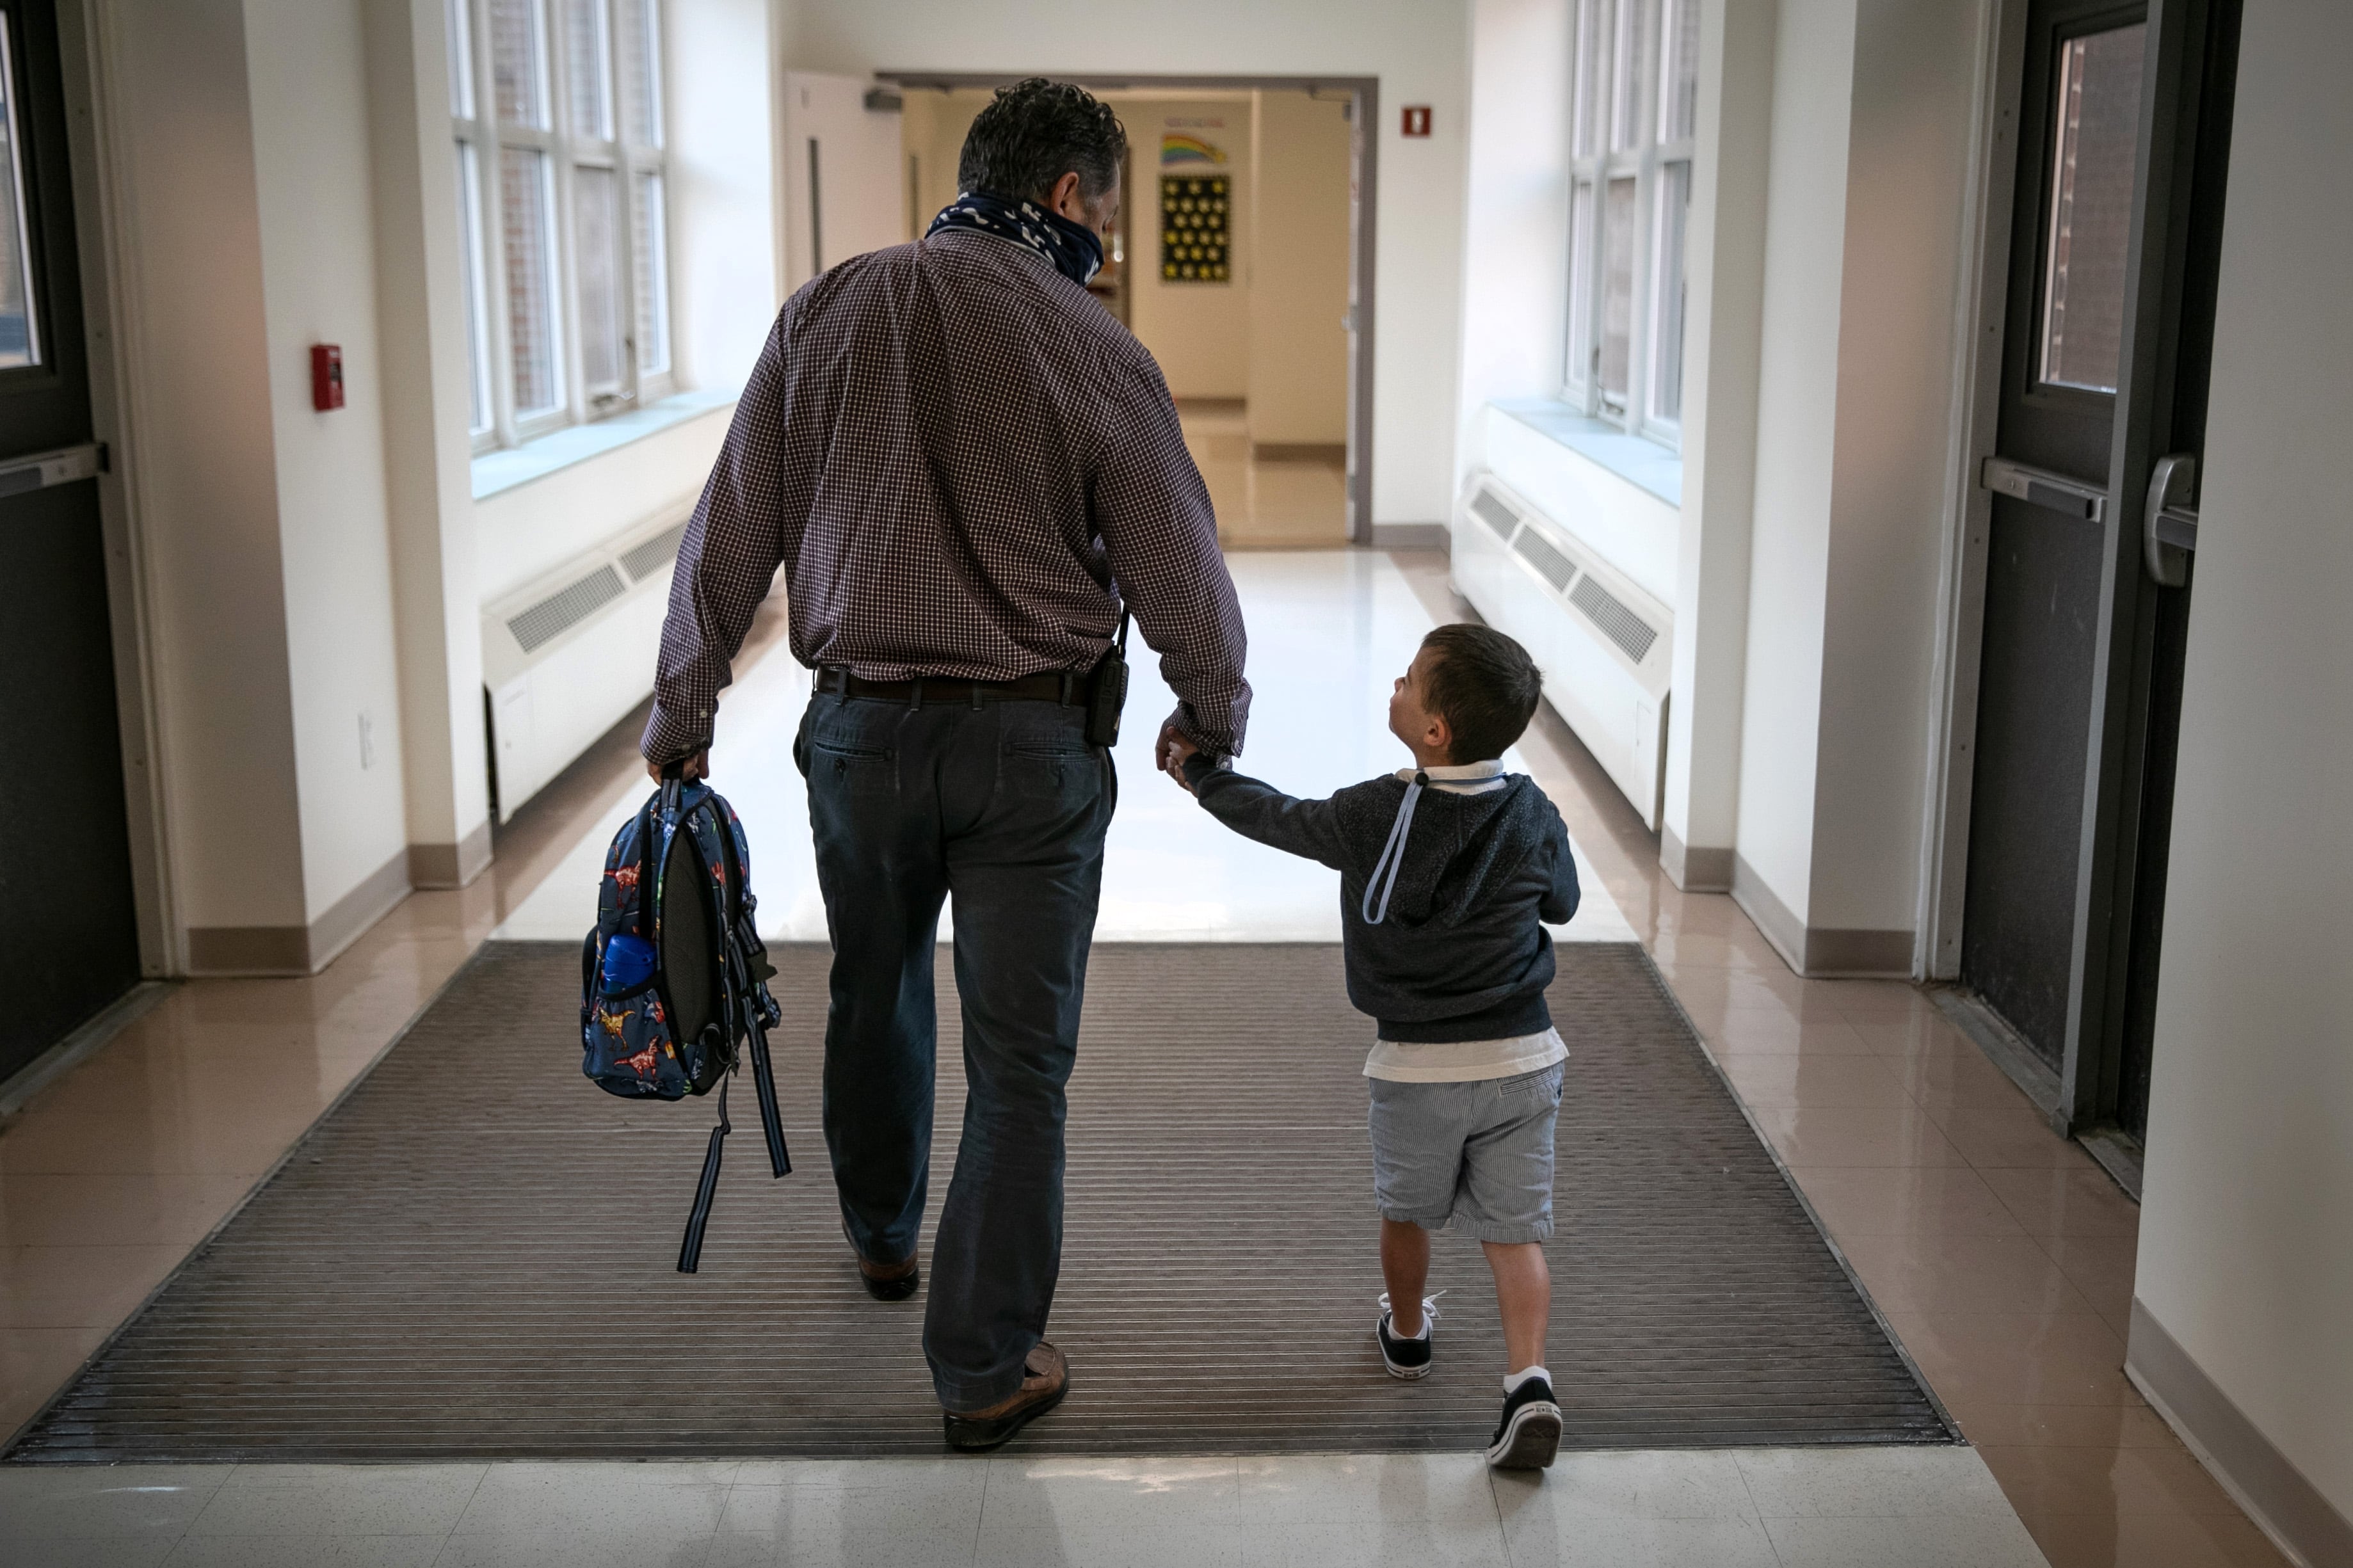 A man walks while holding hands with a young boy in a school hallway, grasping the child’s backpack in the other hand.